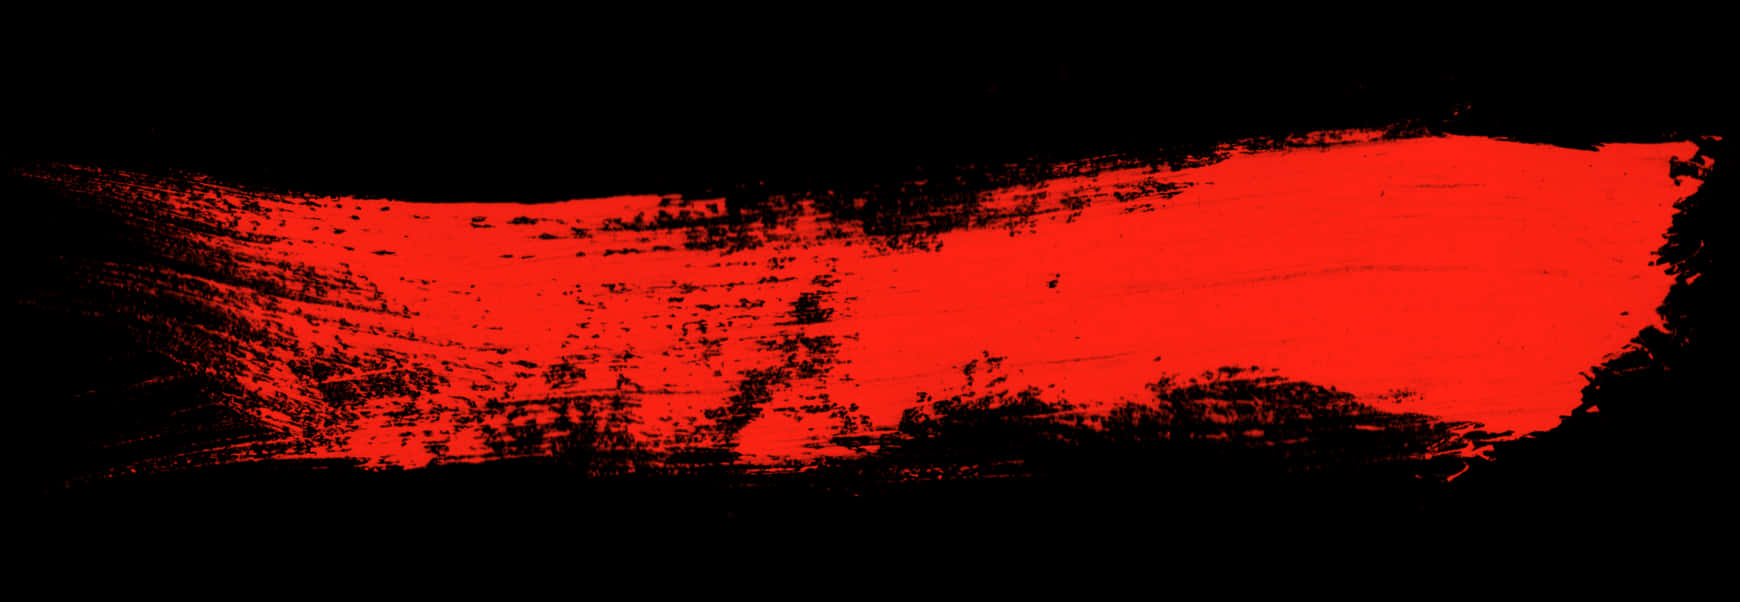 Vibrant_ Red_ Paint_ Stroke_on_ Black_ Background.jpg PNG image